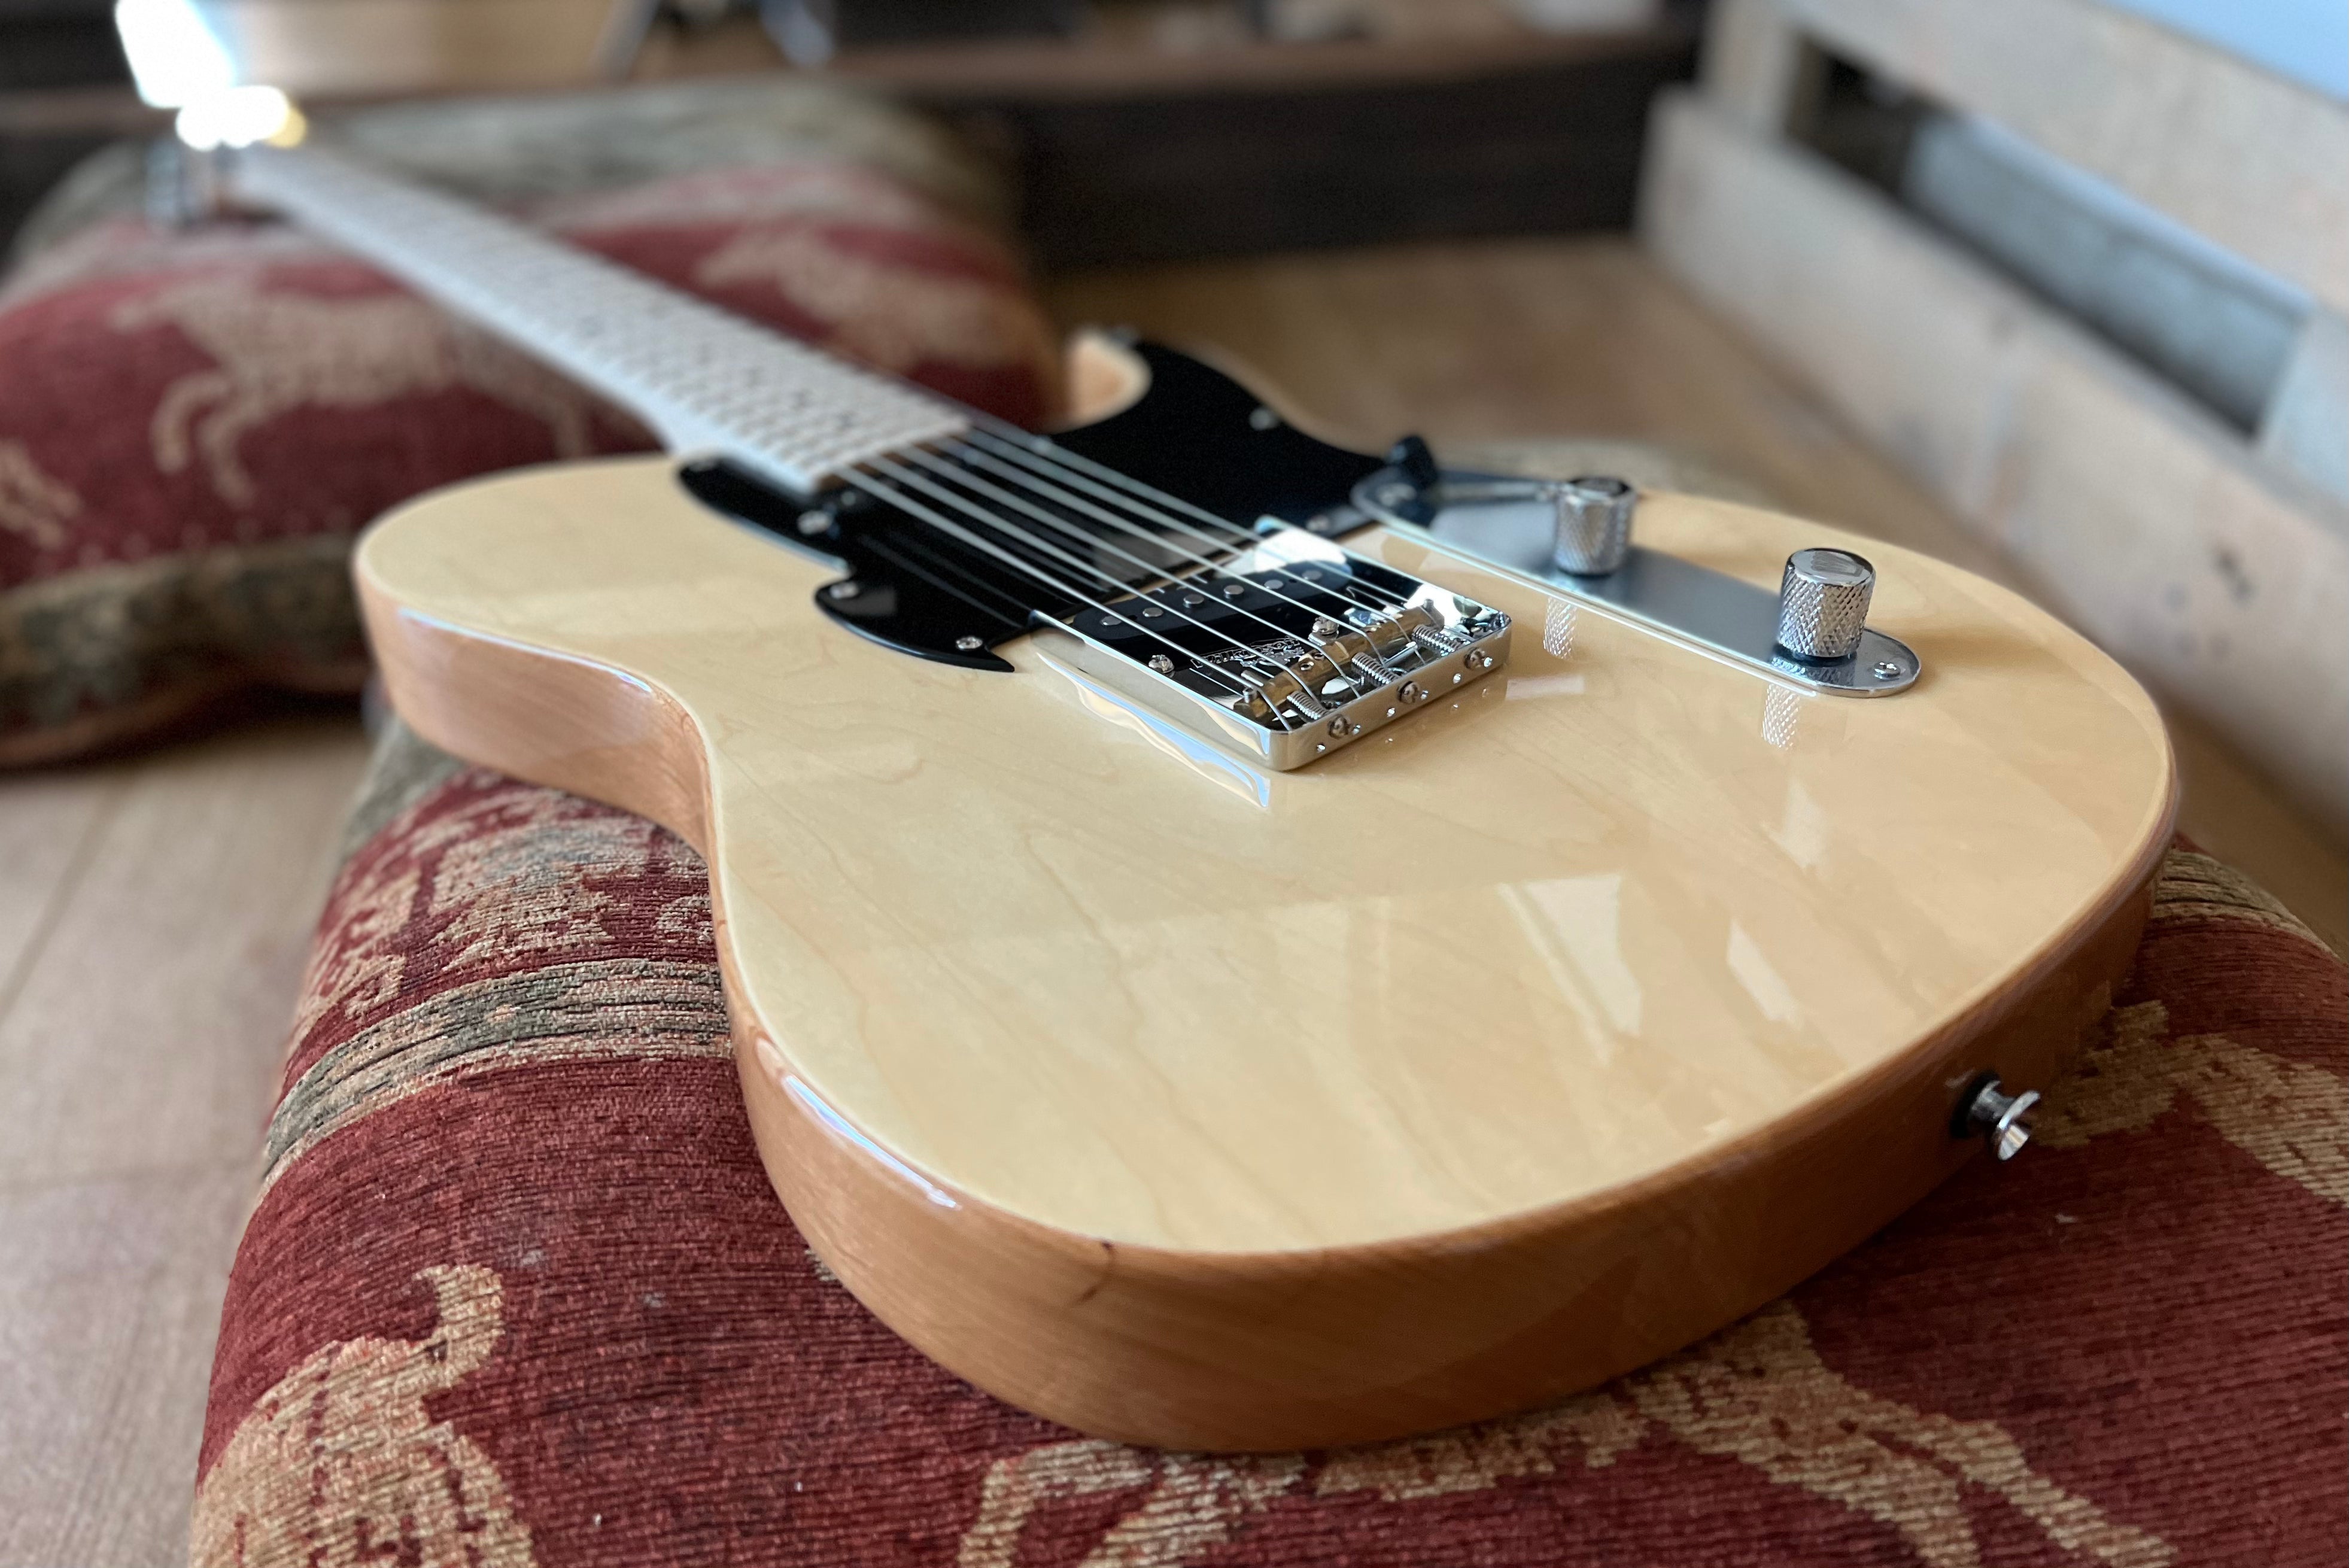 FRET KING COUNTRY SQUIRE CLASSIC TONEMASTER - NATURAL MAPLE  (Includes Our £85 Pro Setup Free), Electric Guitar for sale at Richards Guitars.